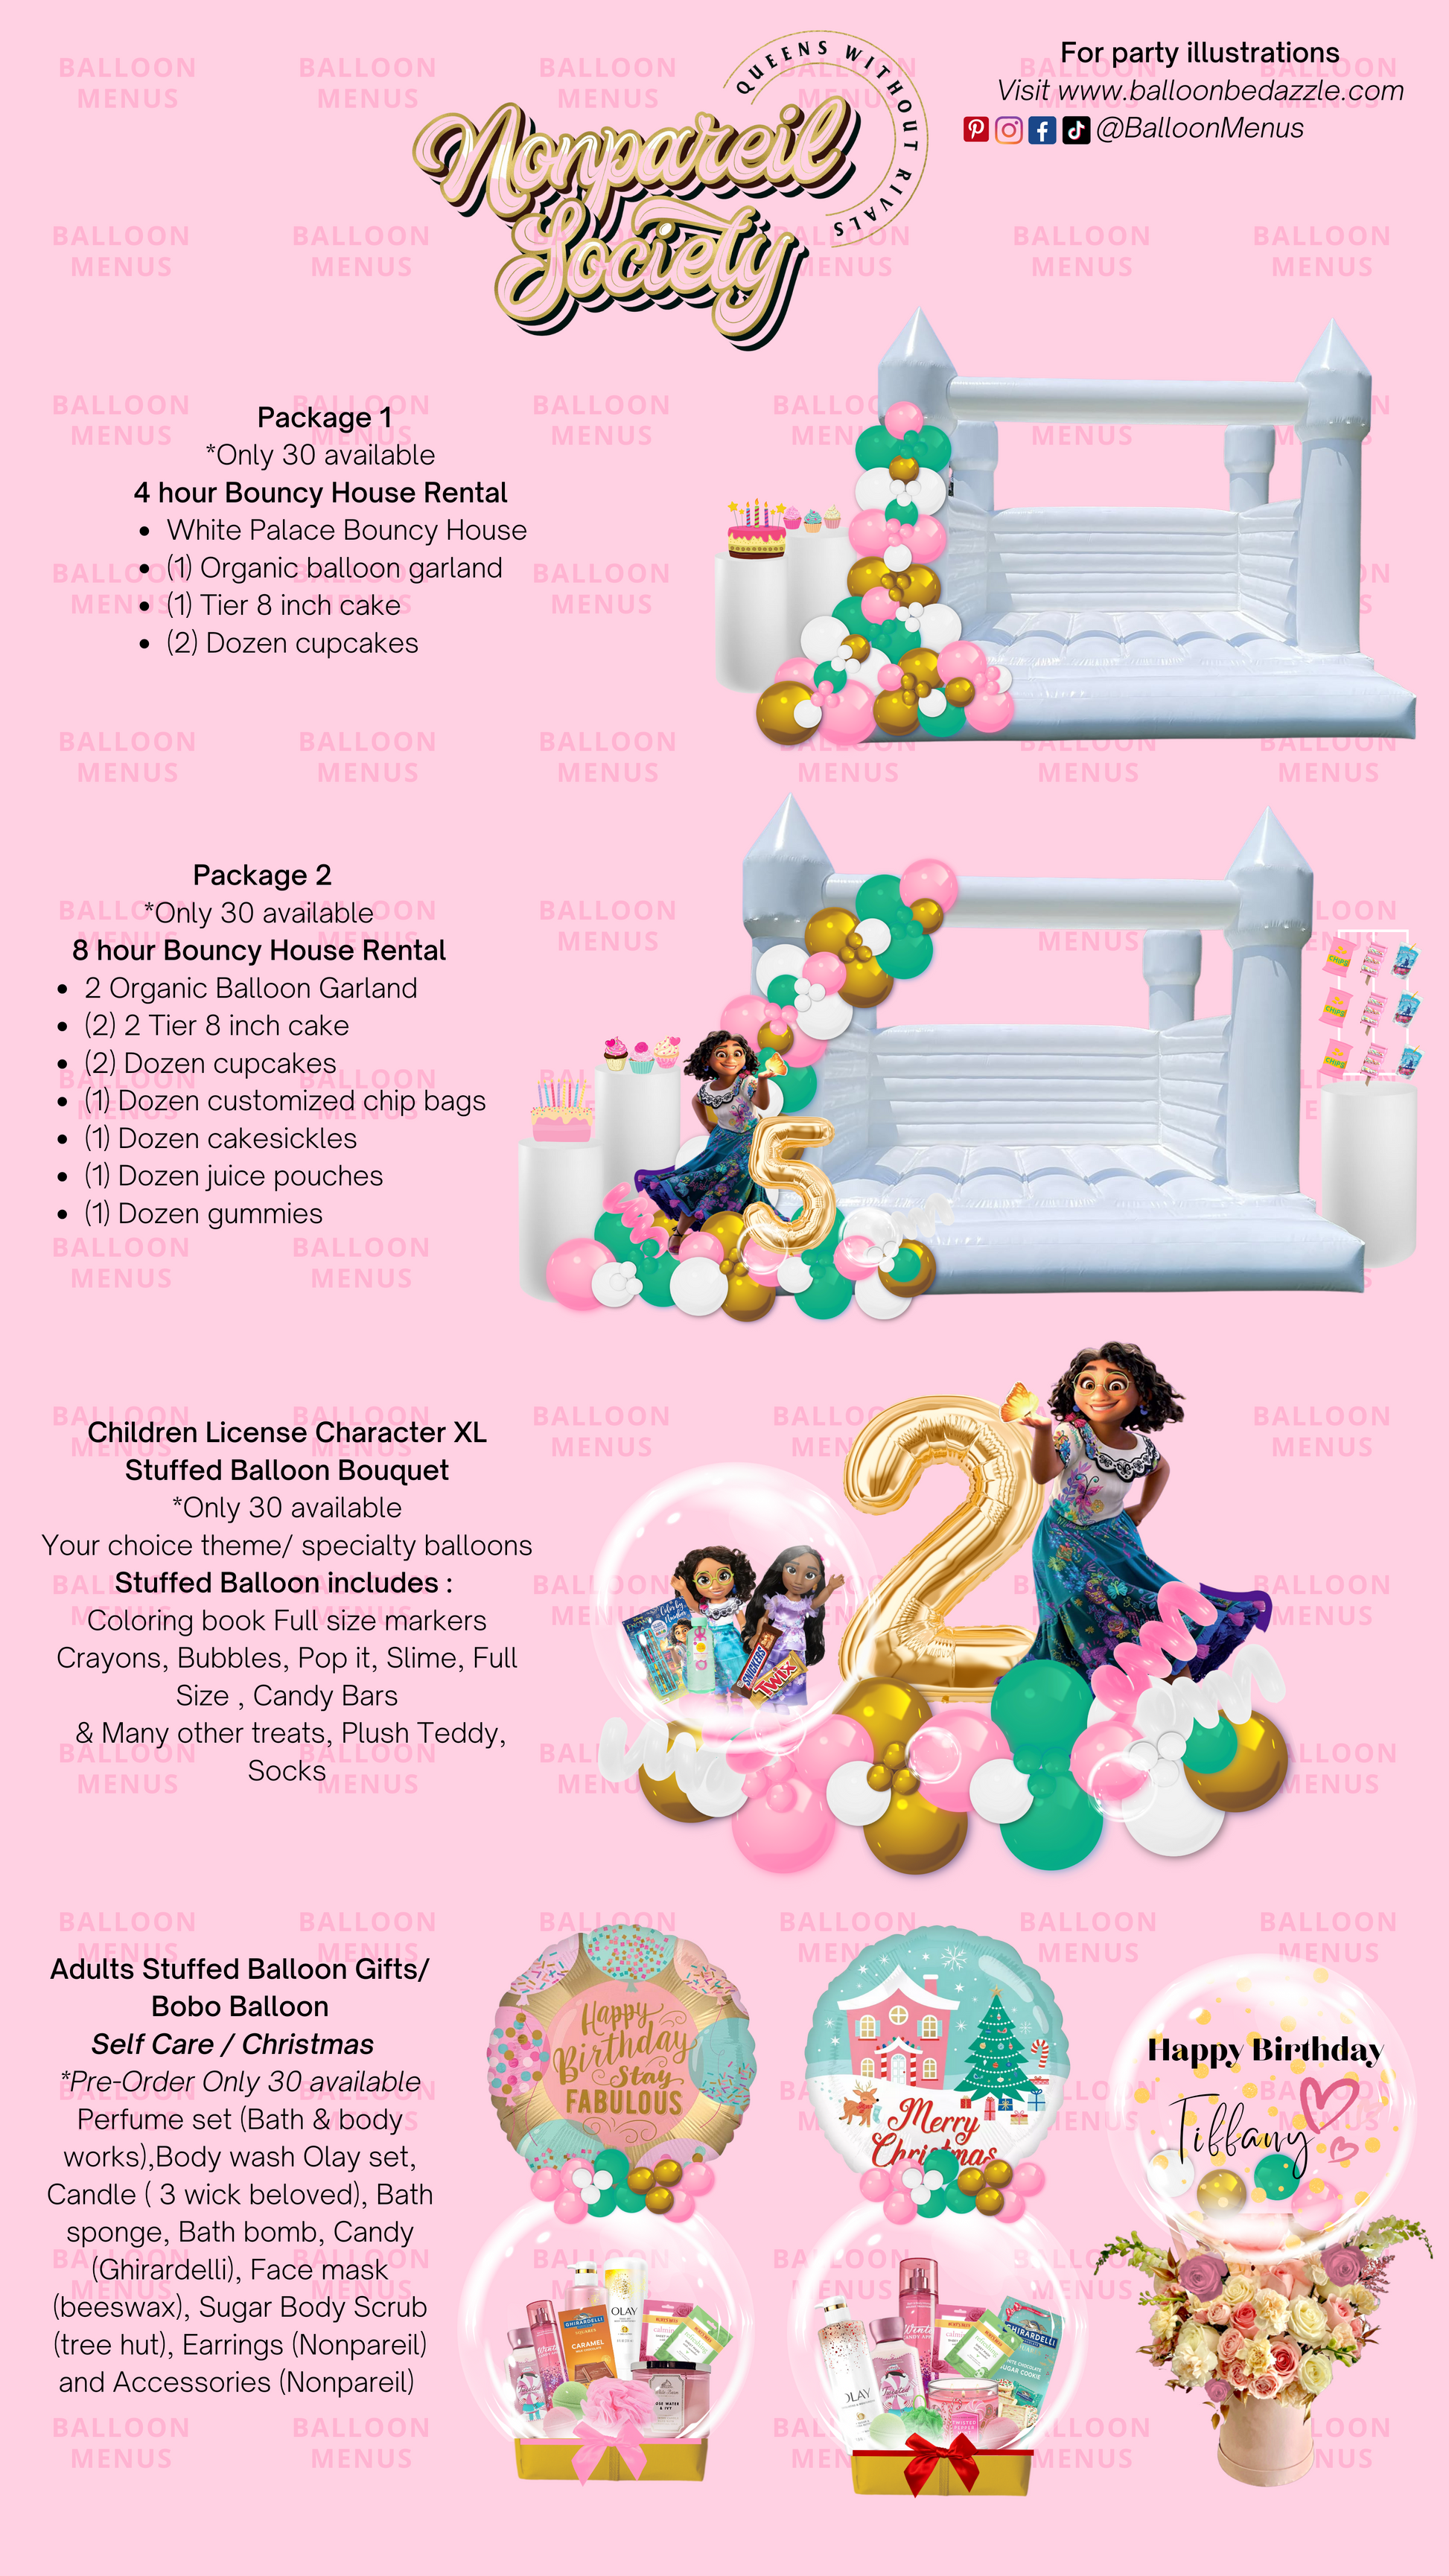 Balloon Stuffing - Balloon Accessories - Product Lines